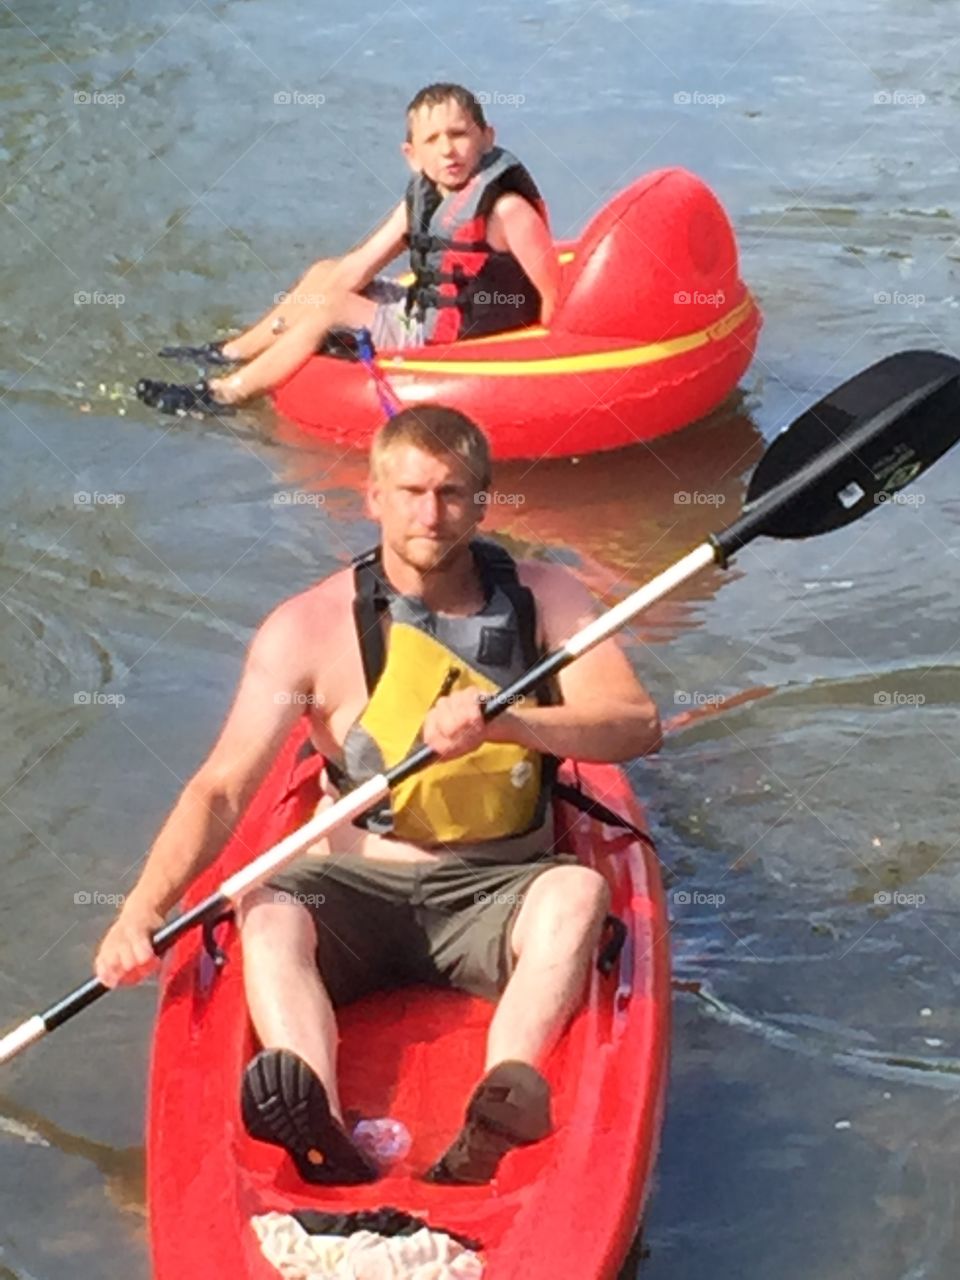 Kayaking on the river